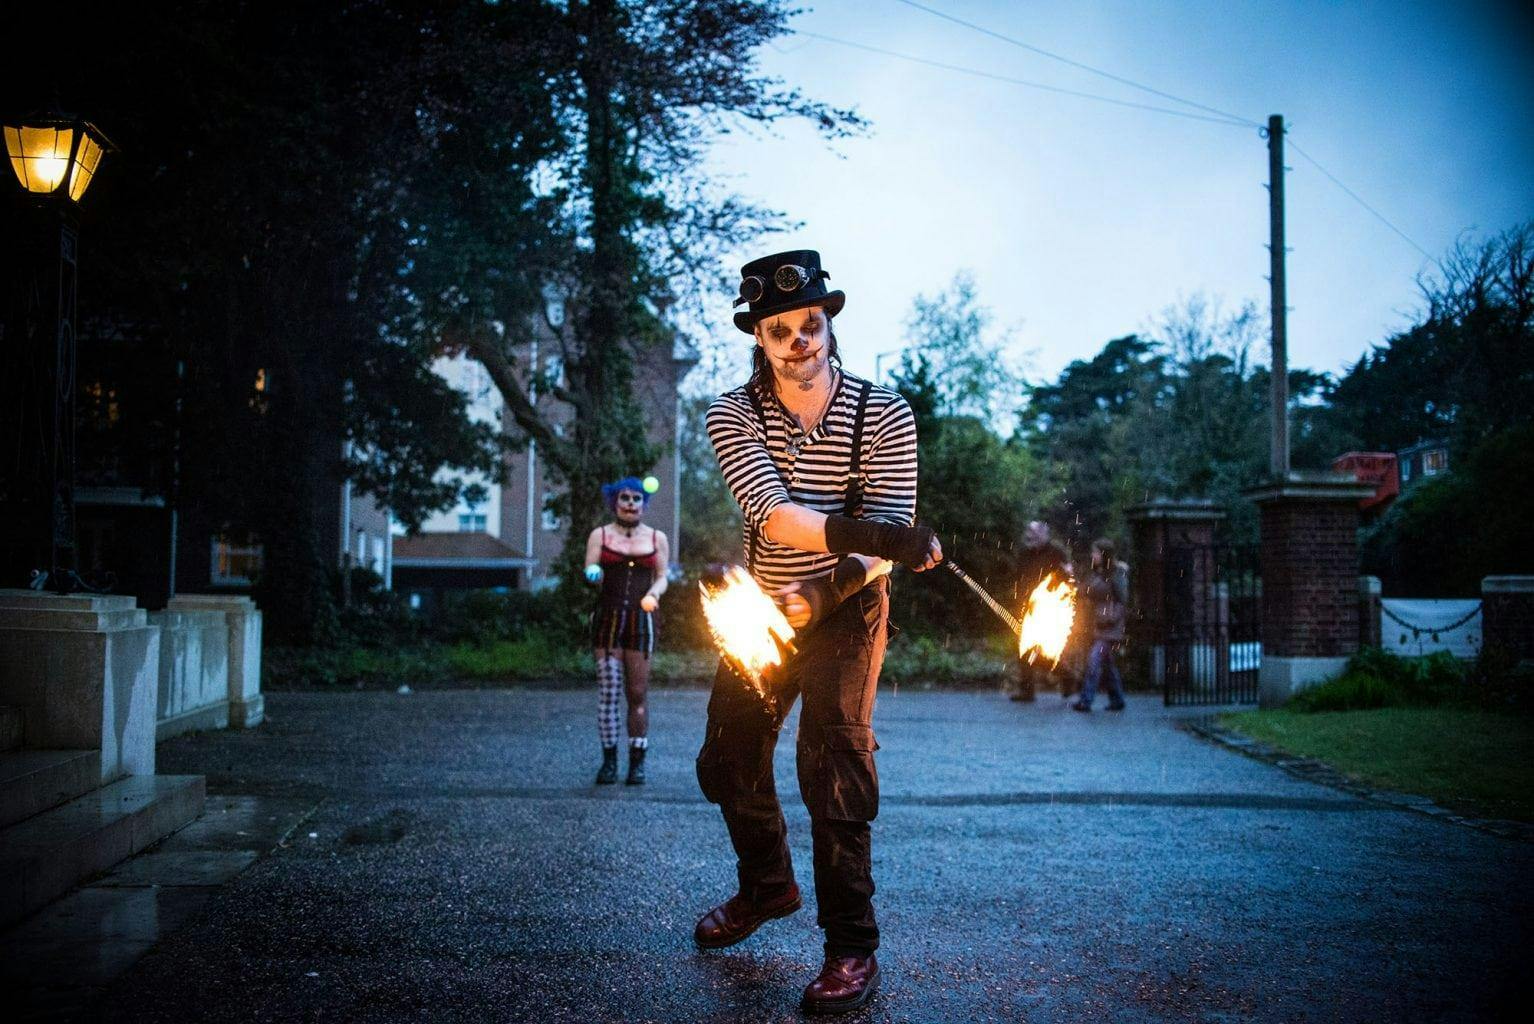 A fire juggler performing in costume with fire sticks on a pavement outside a building.